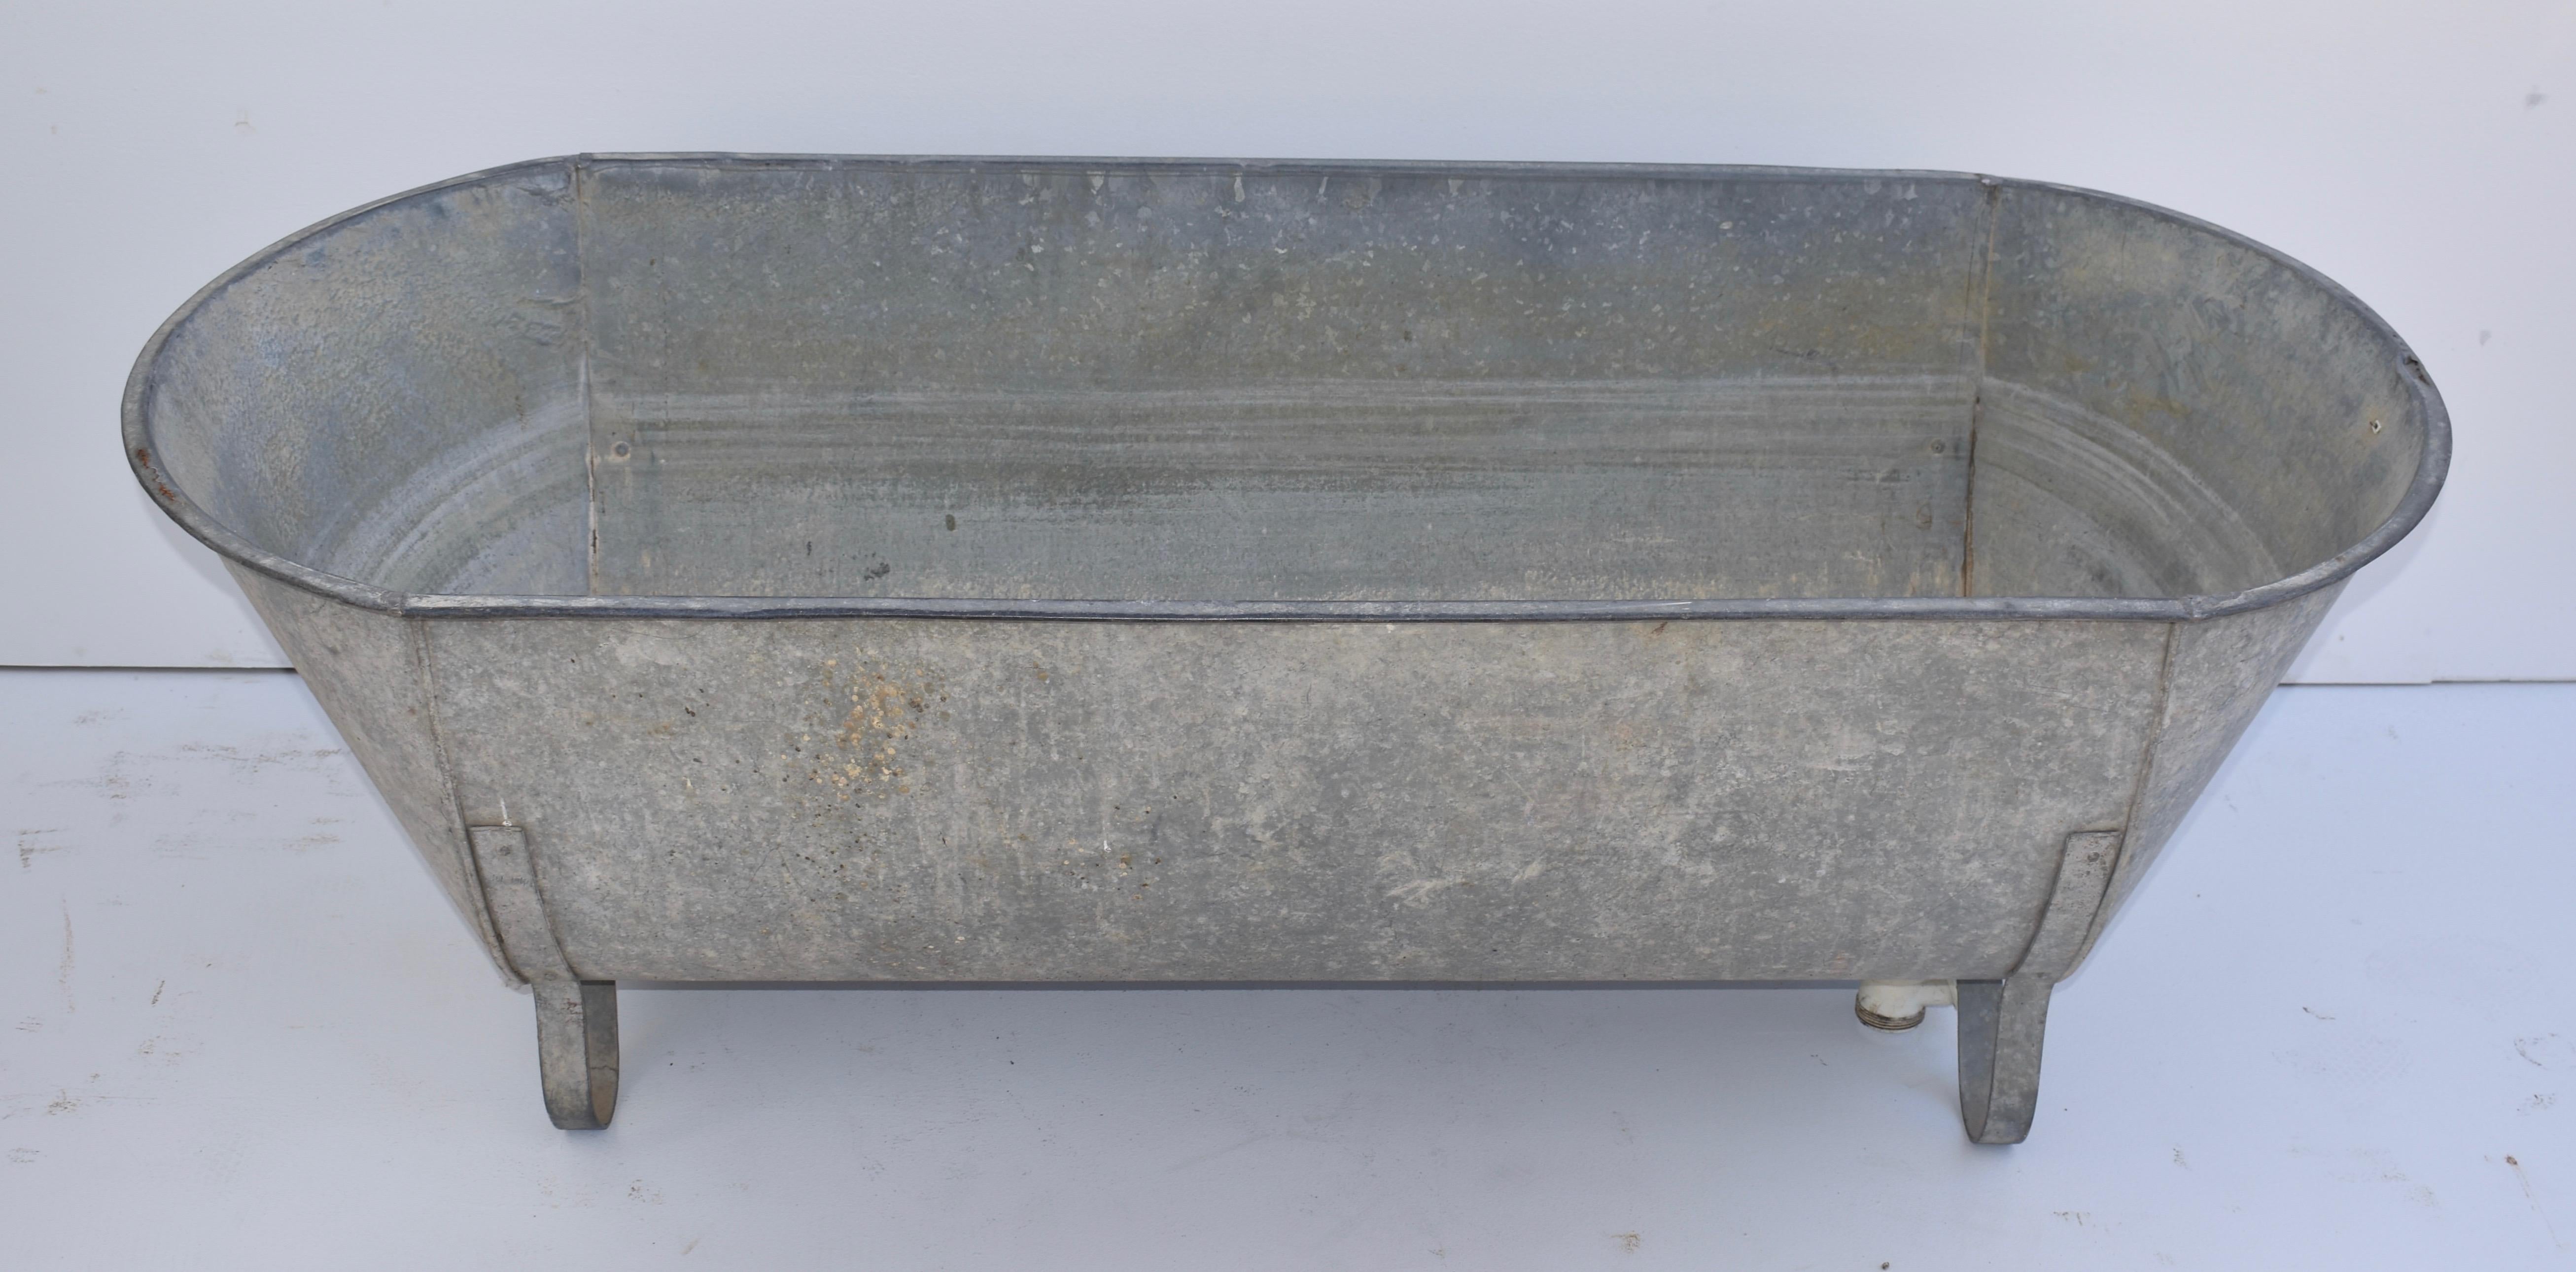 This is a Central European zinc bathtub with attractive curled iron feet. It has a retro-fitted plastic trap and drain hole liner.